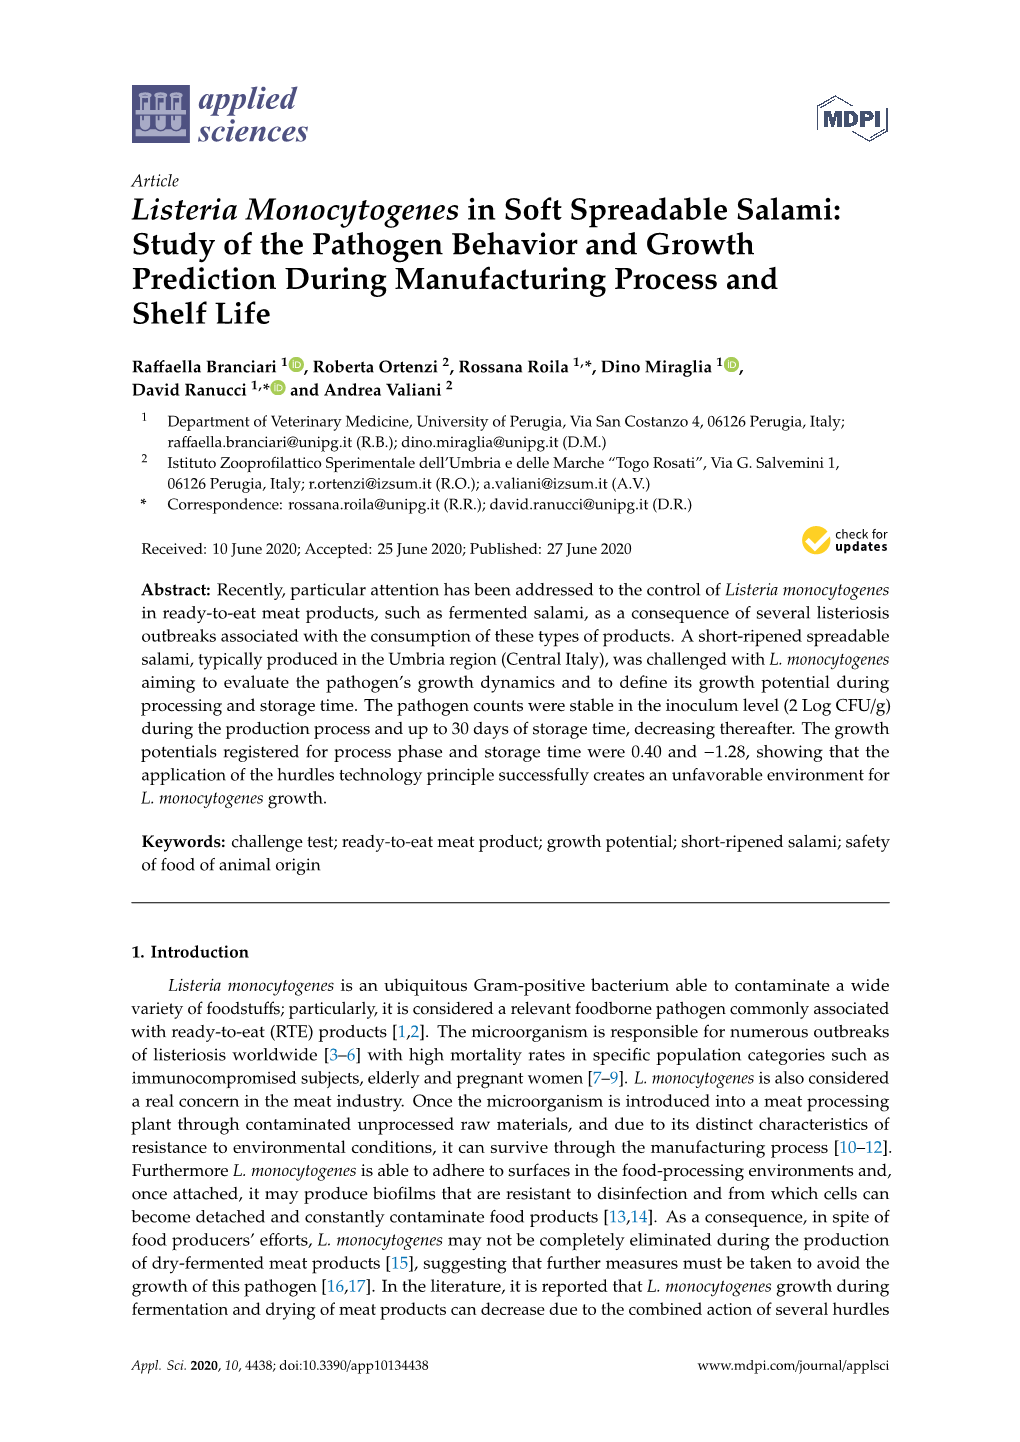 Listeria Monocytogenes in Soft Spreadable Salami: Study of the Pathogen Behavior and Growth Prediction During Manufacturing Process and Shelf Life